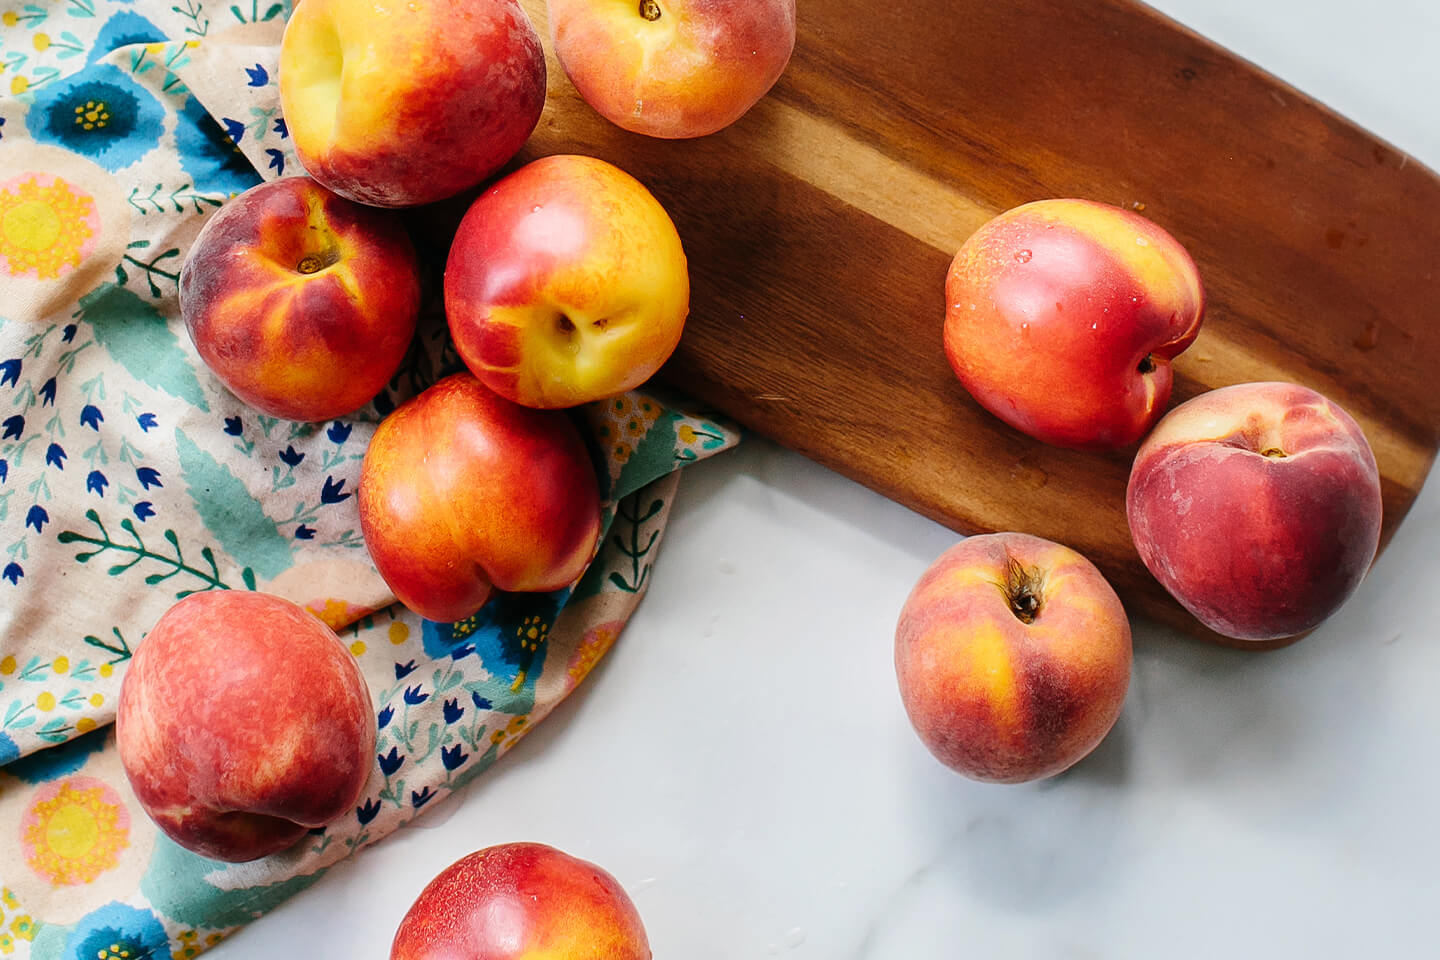 Ten whole peaches on a countertop next to a cutting board.